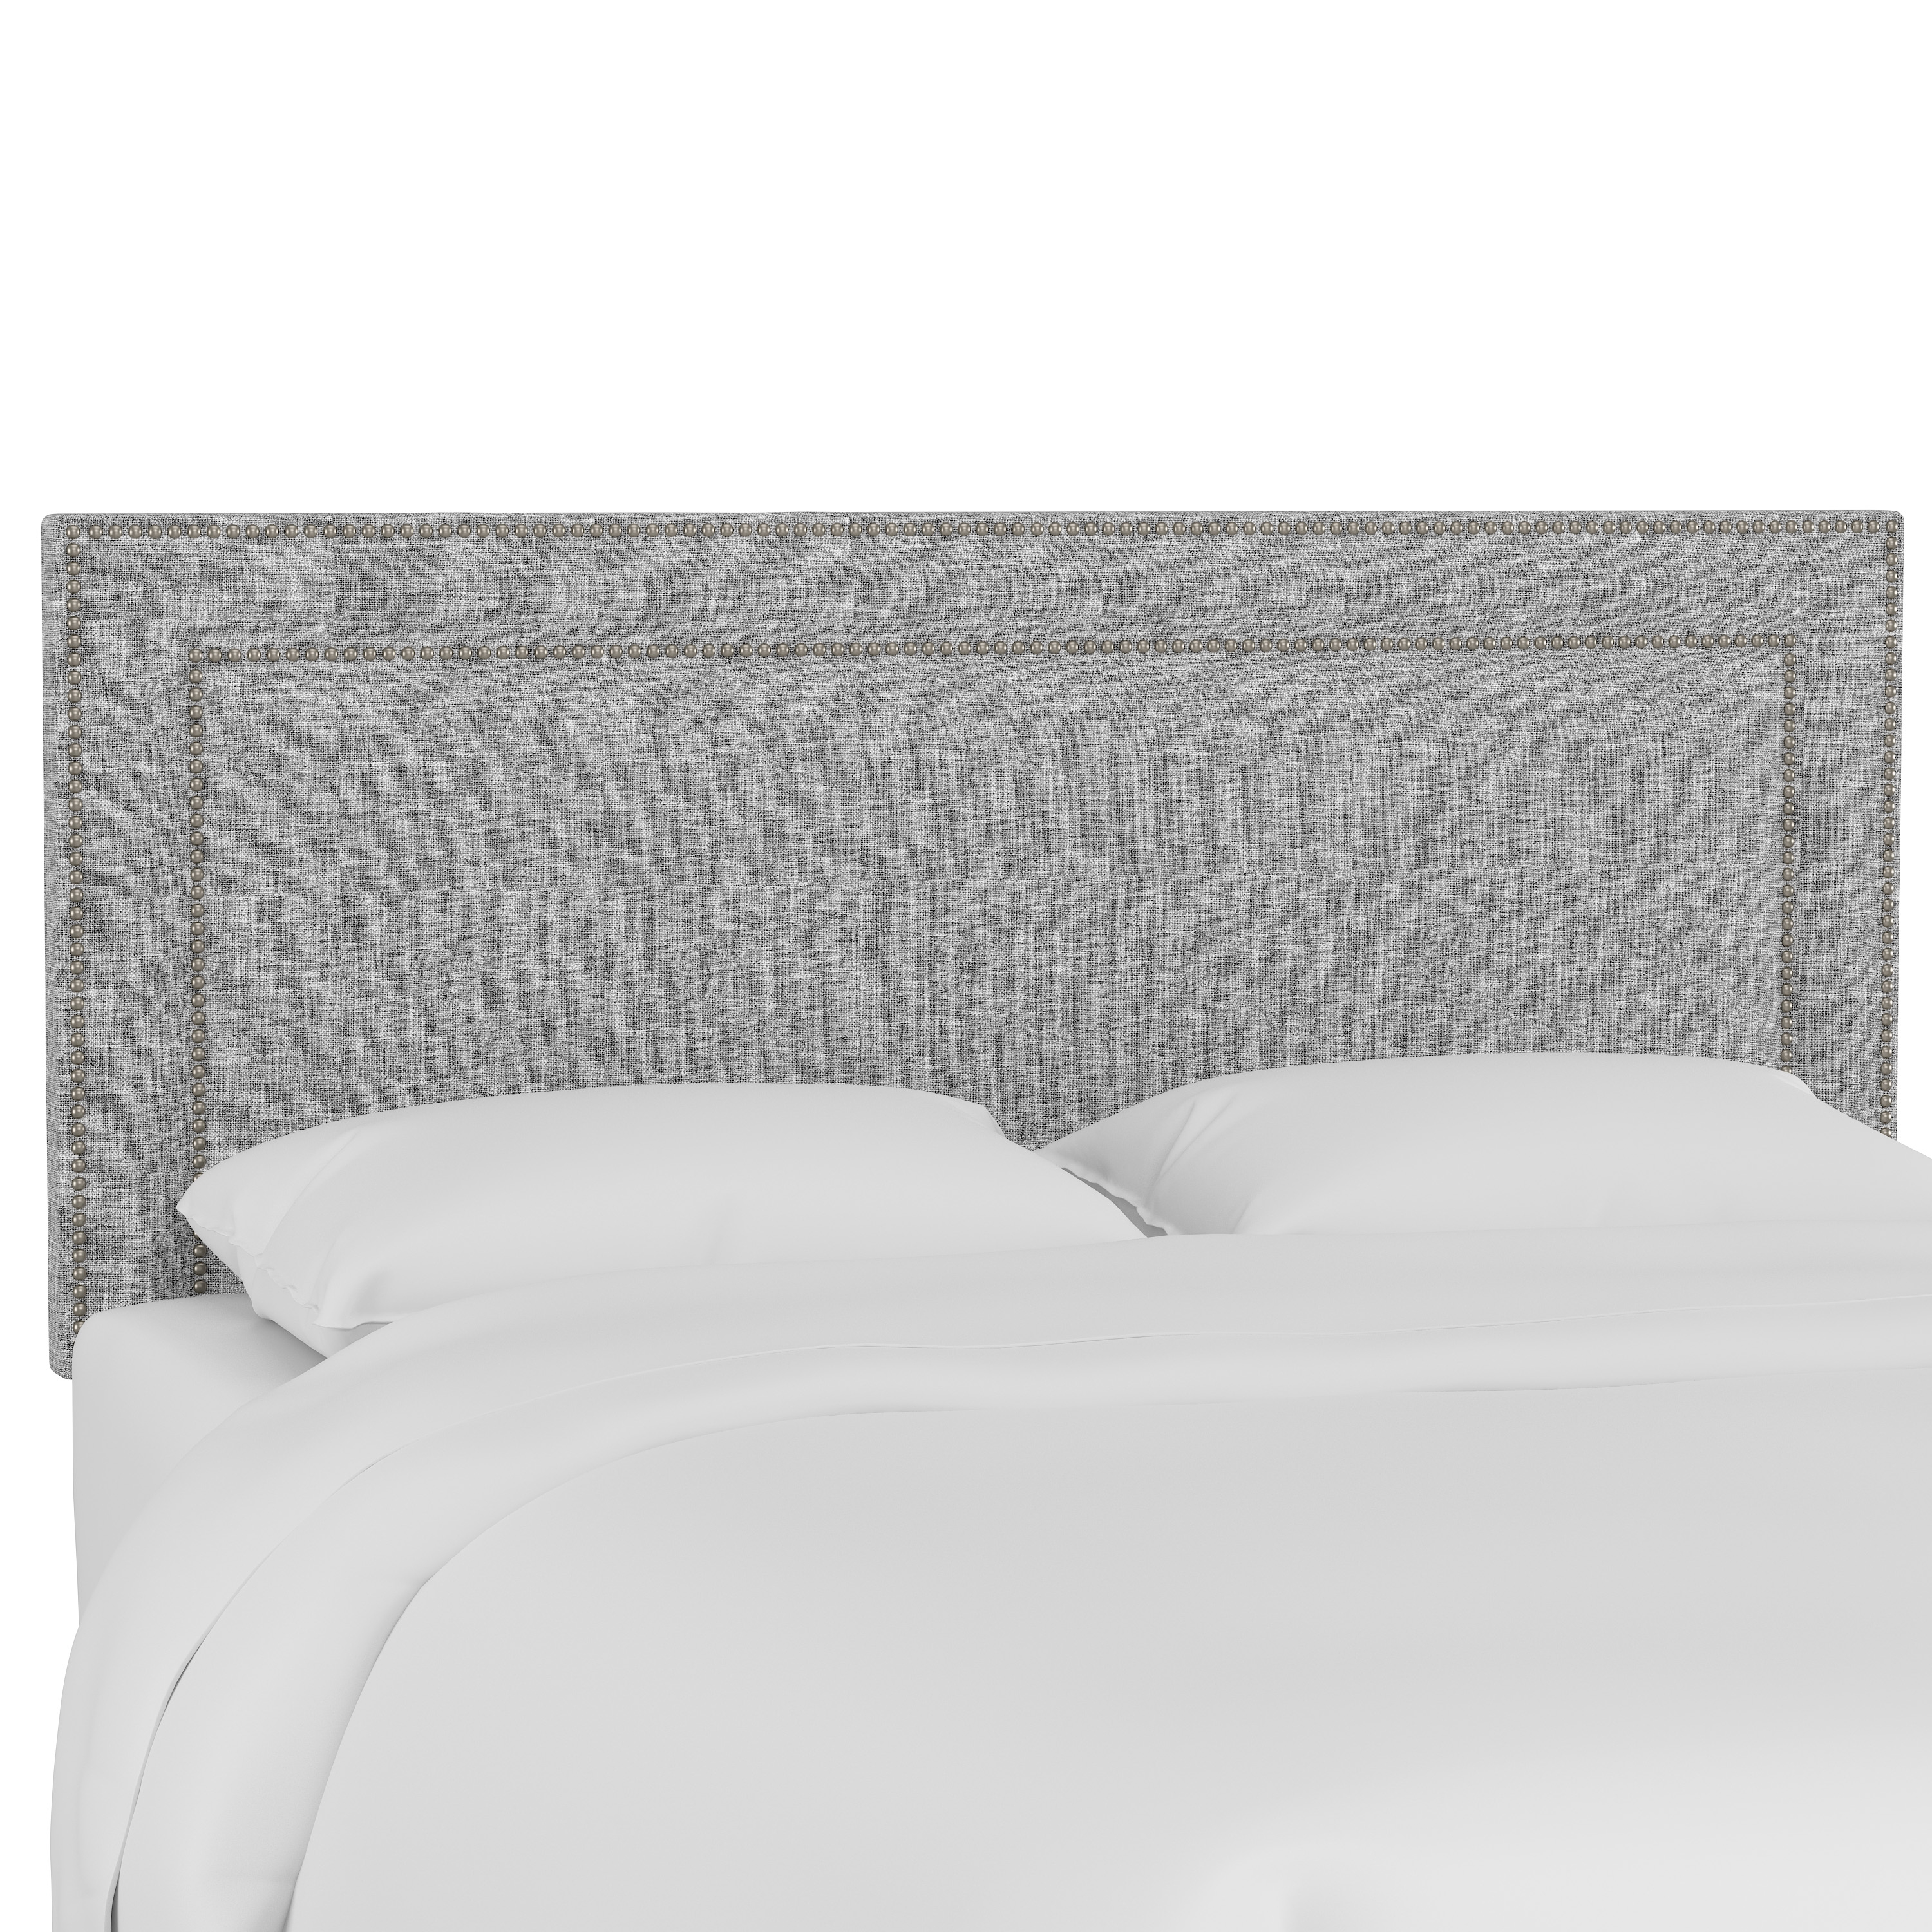 Williams Headboard, Queen, Pumice, Pewter Nailheads - Image 0